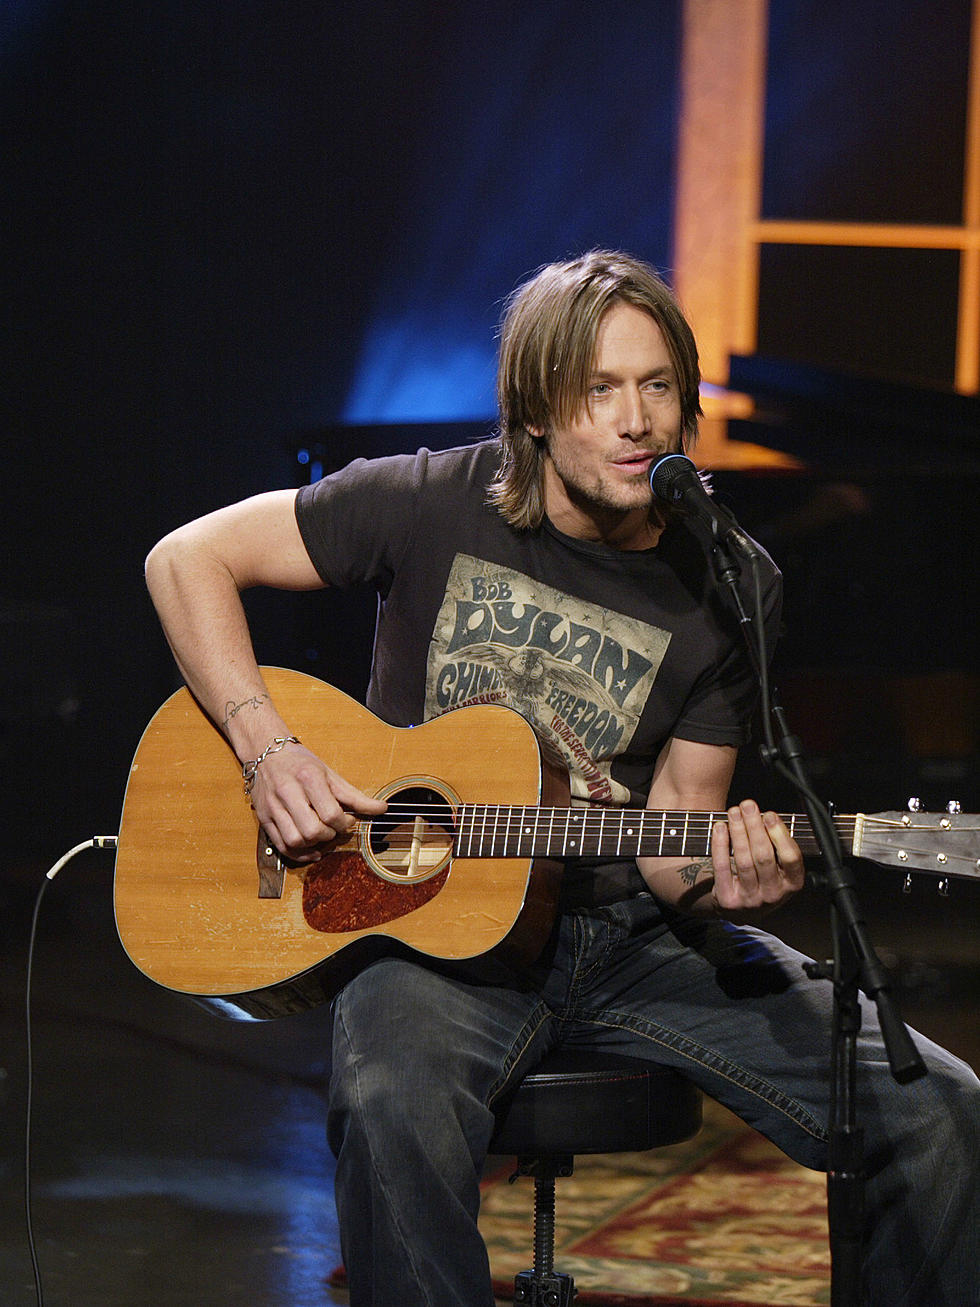 Behind The Scenes, The Making Of Keith Urban’s New Song – VIDEO